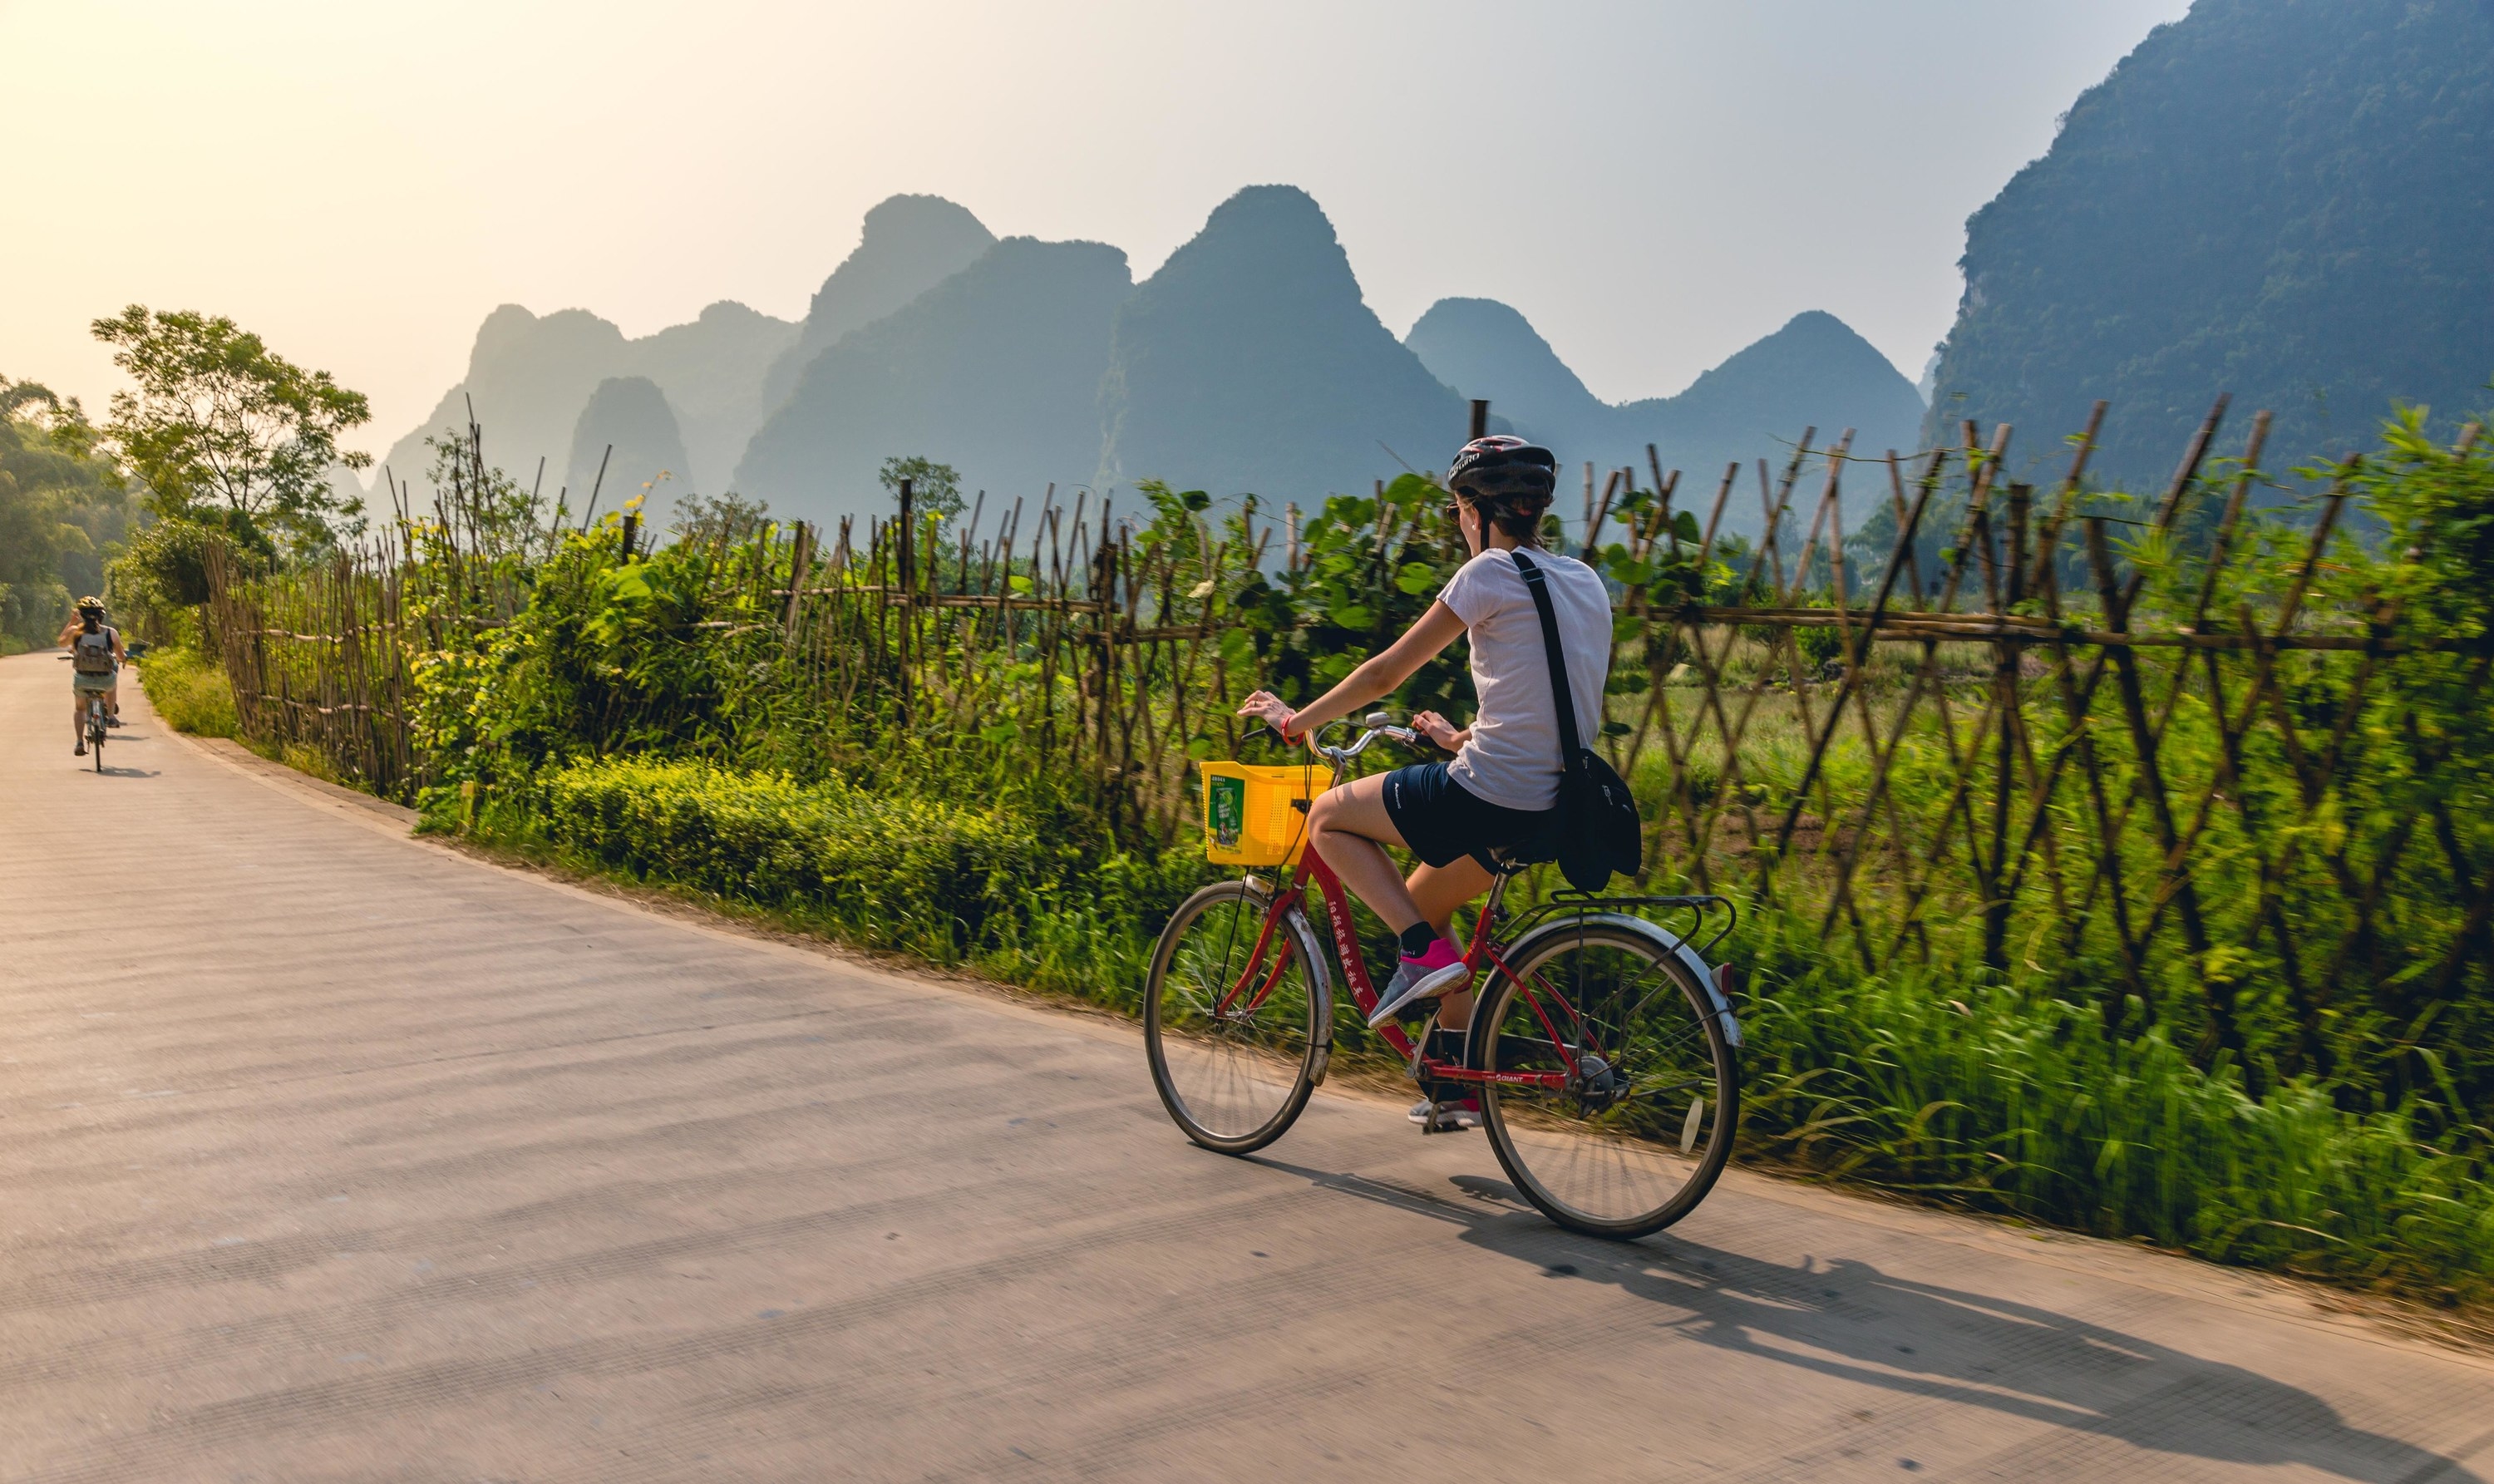 a woman riding a bicycle down a road in Yangshuo, with greenery and rounded hills surrounding her